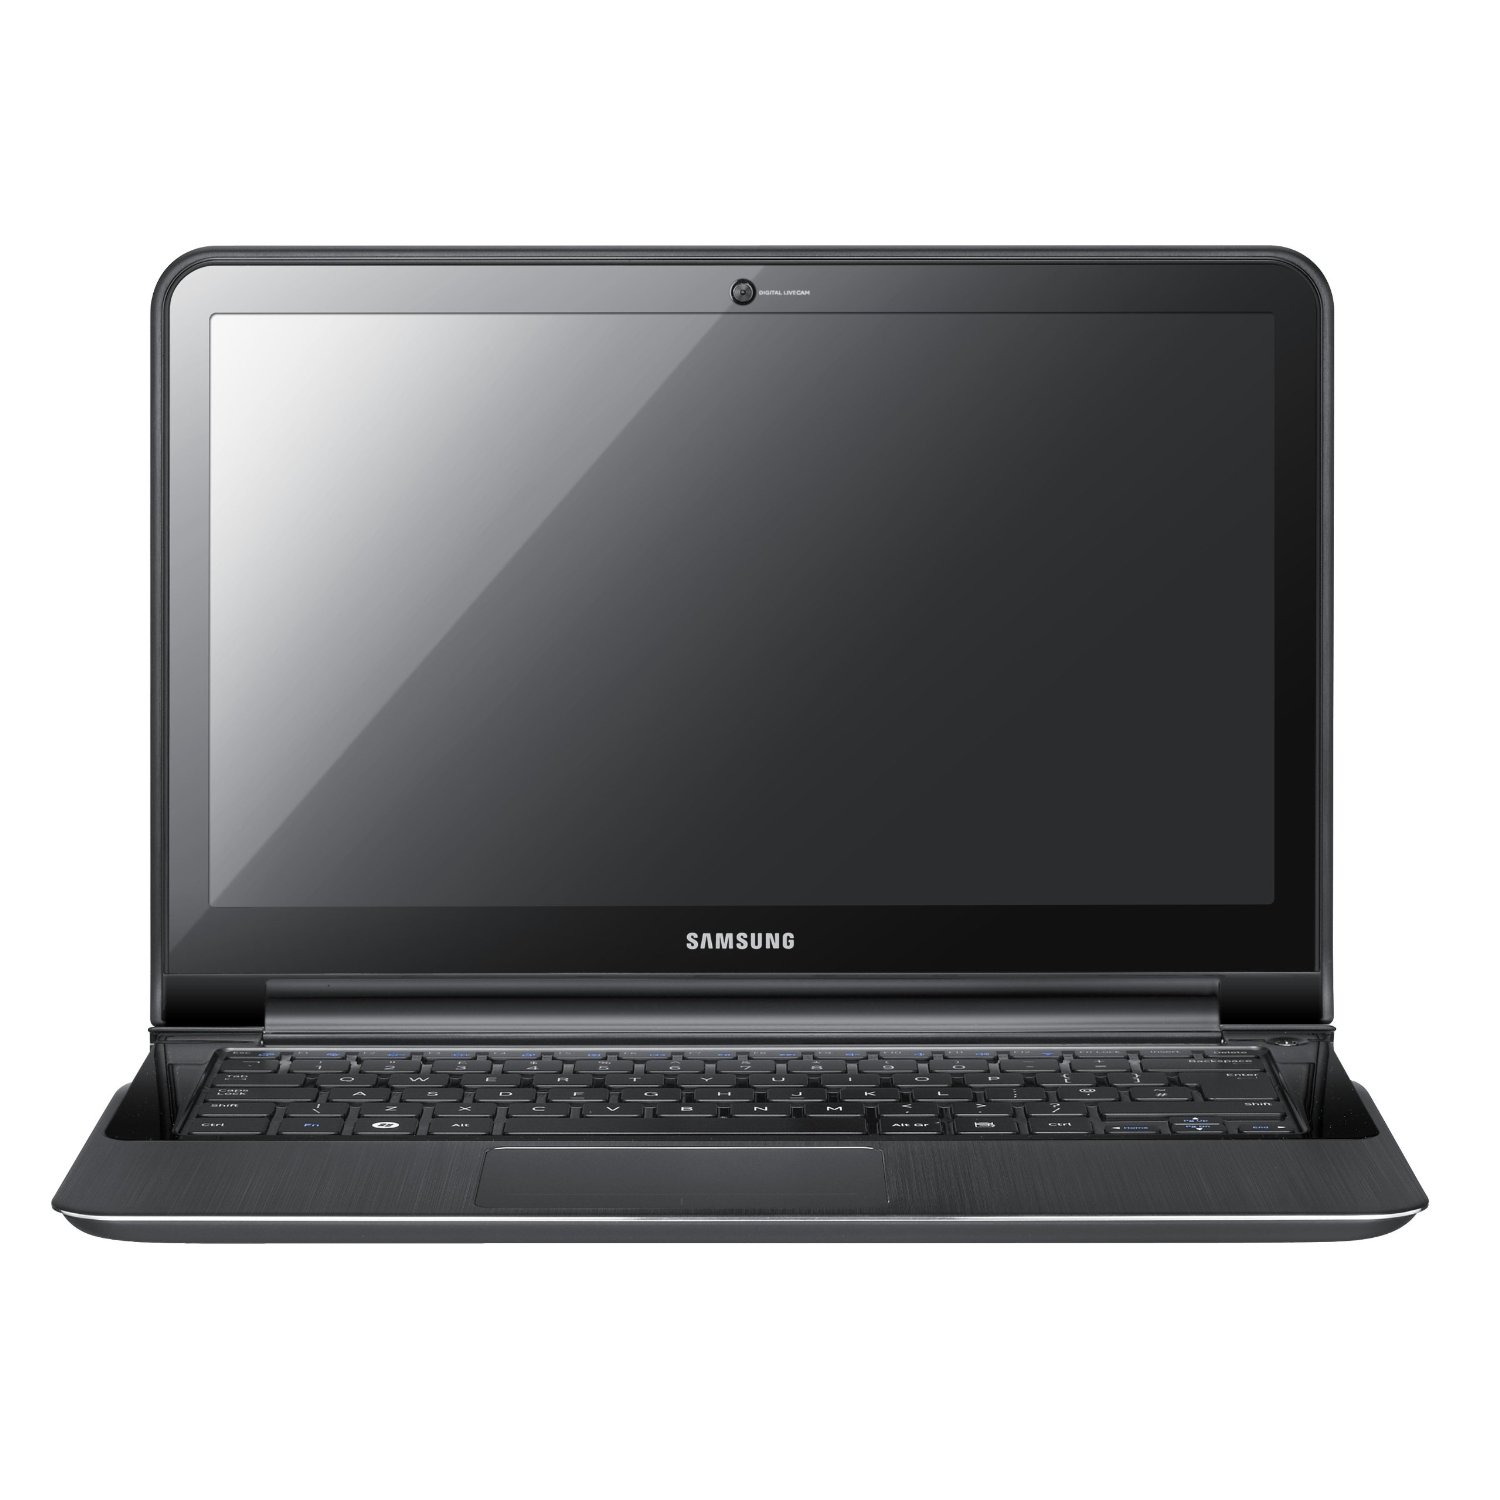 http://thetechjournal.com/wp-content/uploads/images/1108/1312961318-samsung-series-9-np900x3aa02us-133inch-laptop-1.jpg